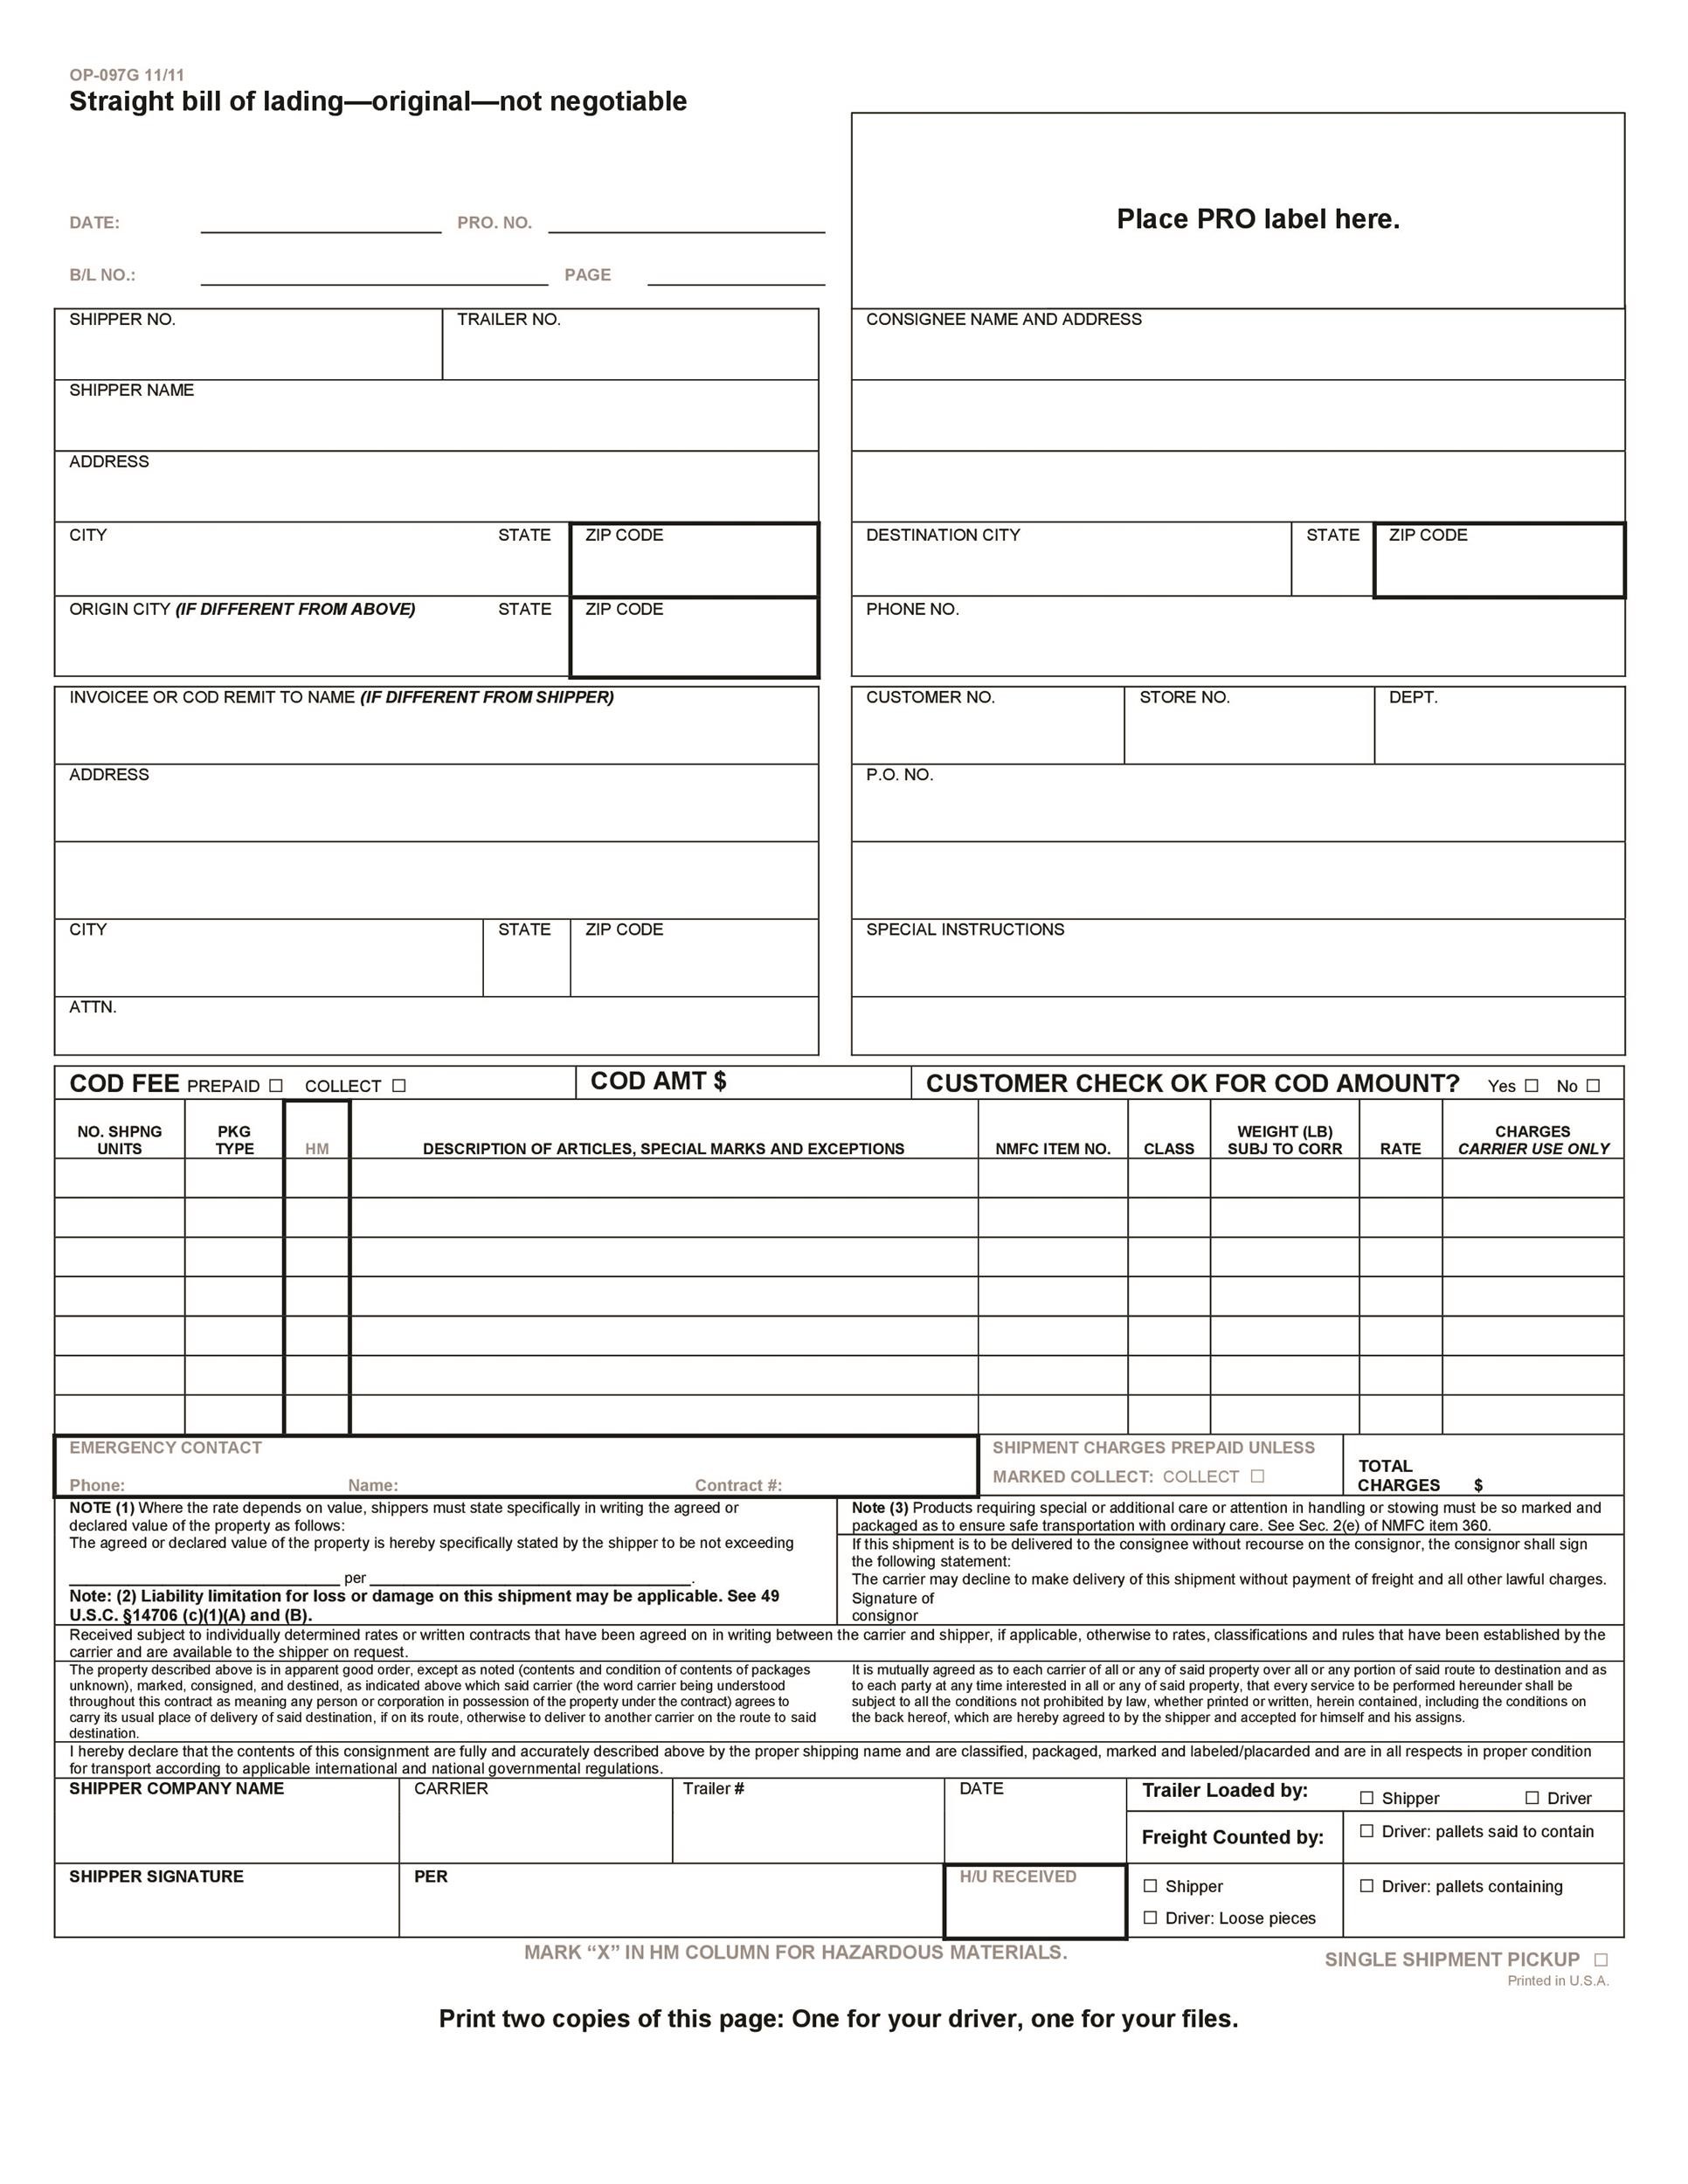 40 Free Bill Of Lading Forms Templates TemplateLab